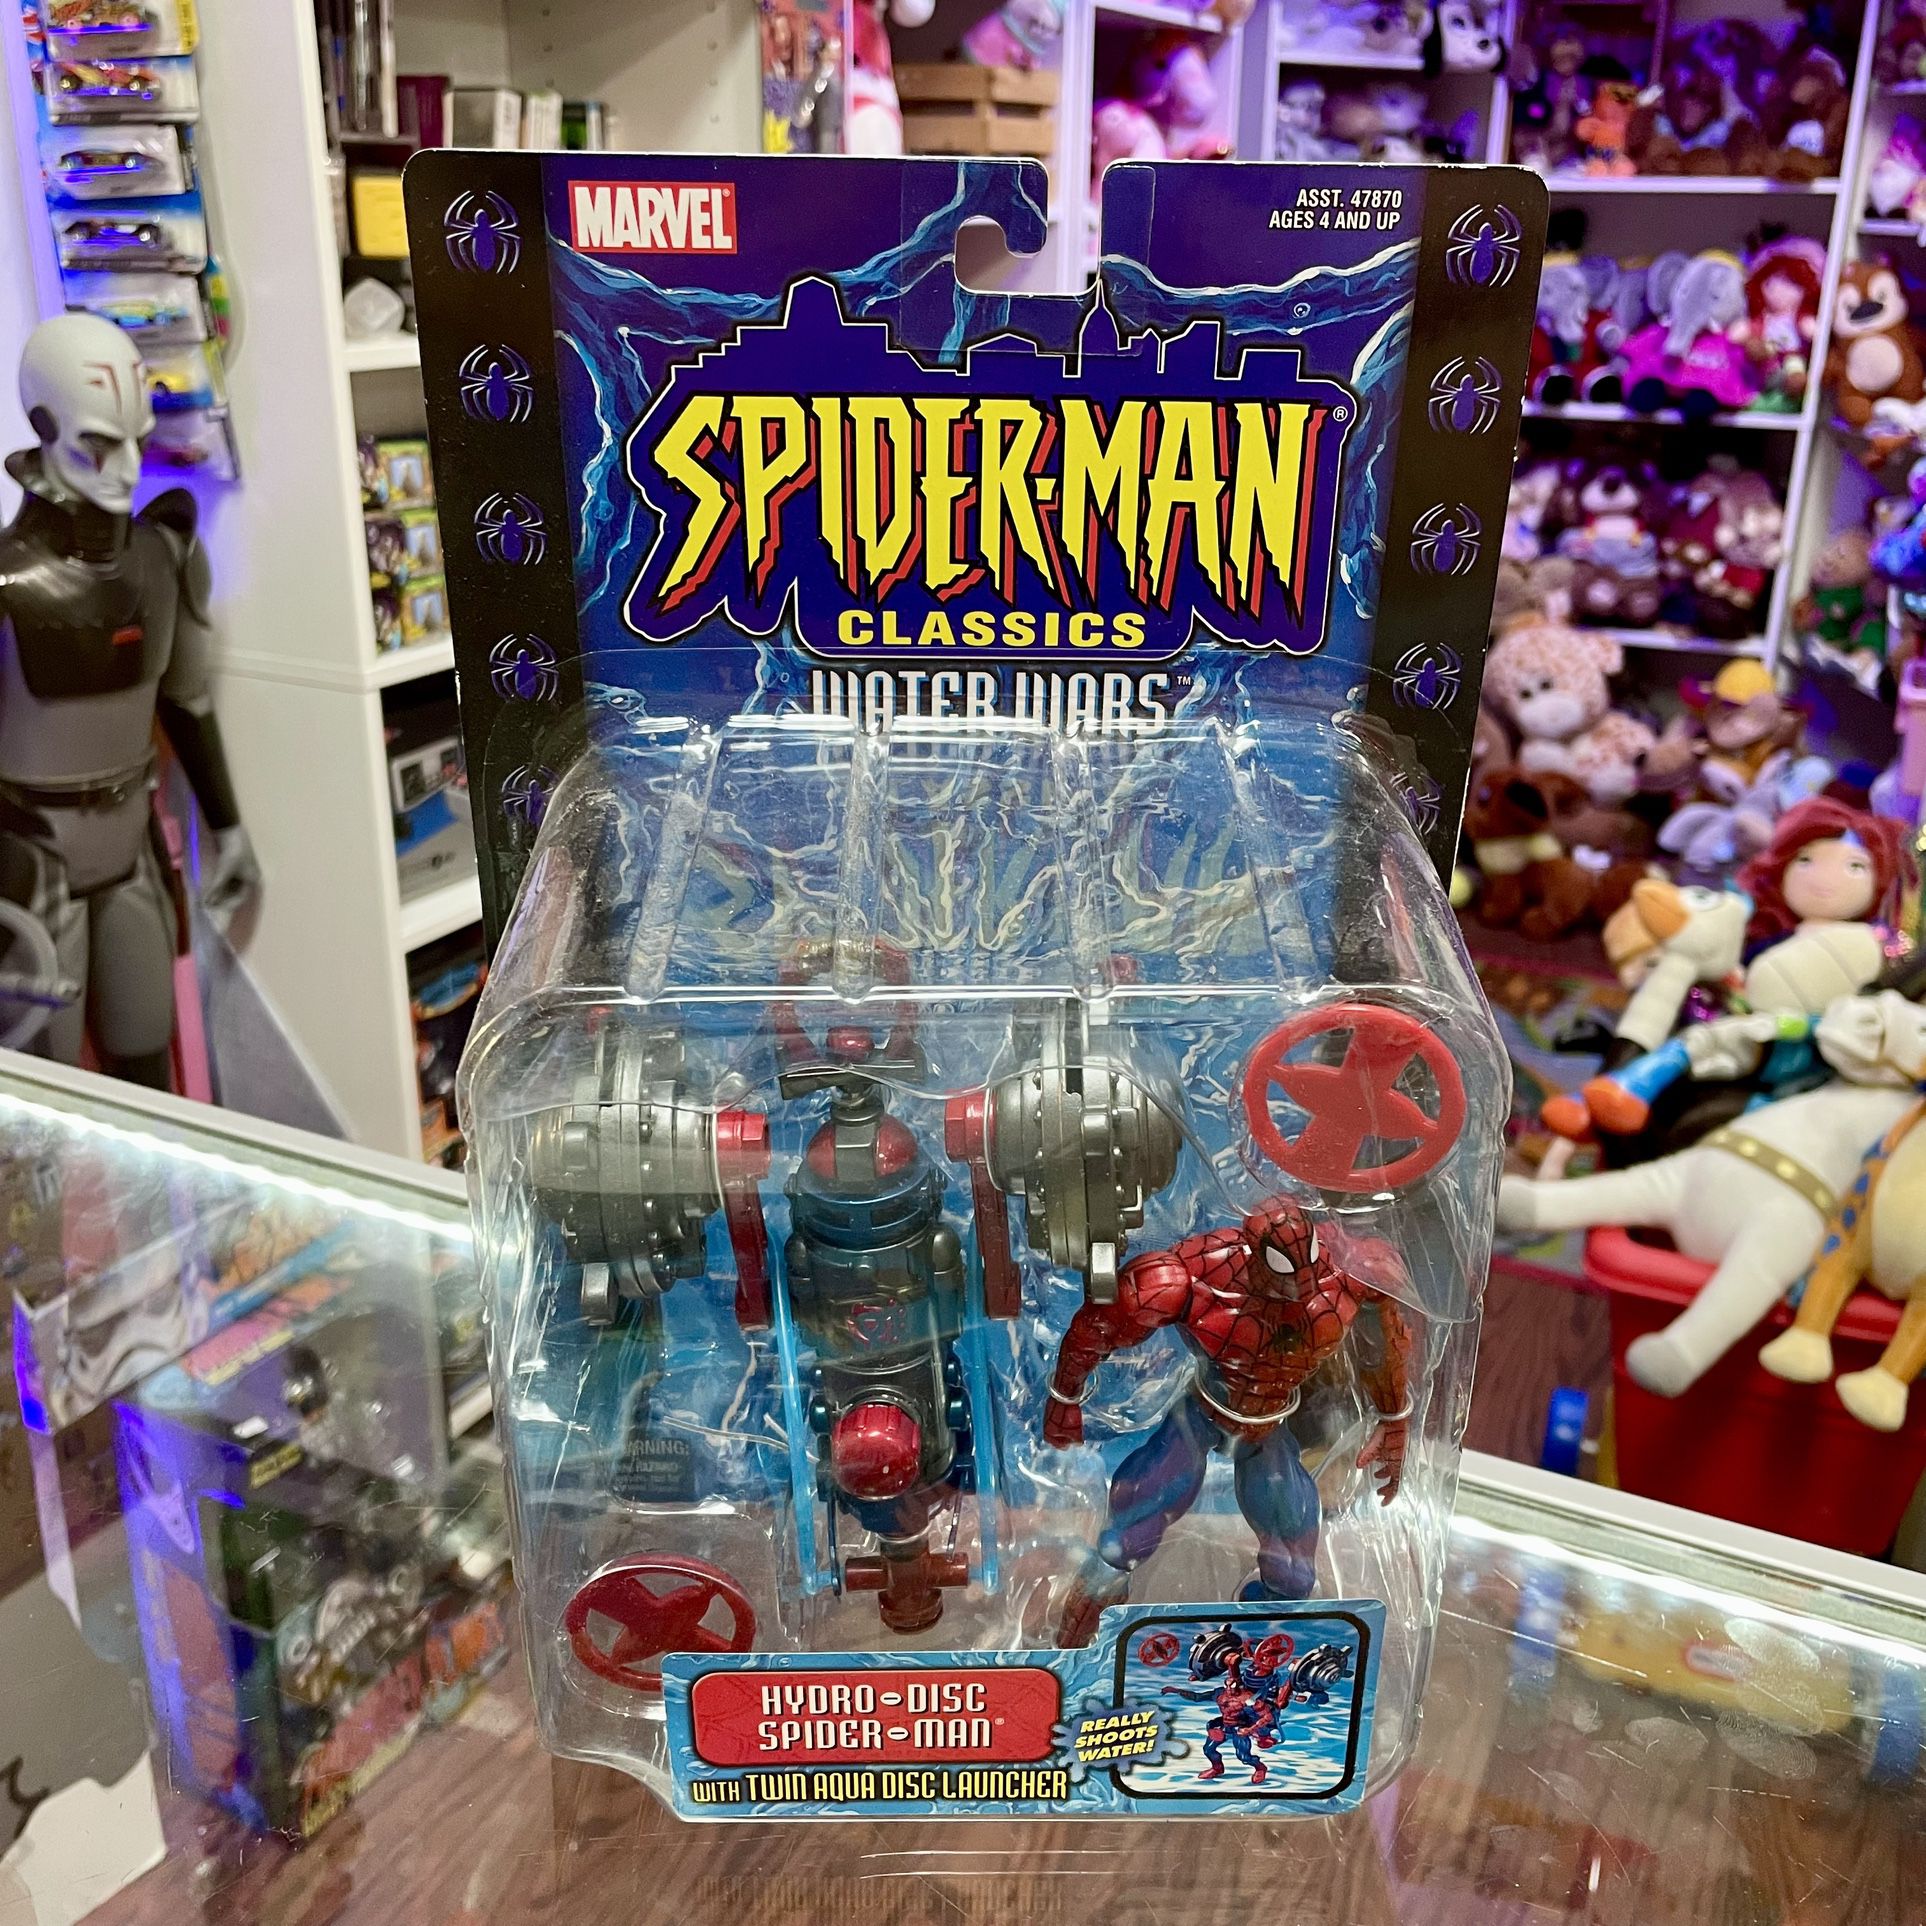 Vintage 2001 Toy Biz Marvel Spider-Man Classics Water Wars Hydro-Disc With Twin Aqua Disc Launcher Action Figure Toy NIB